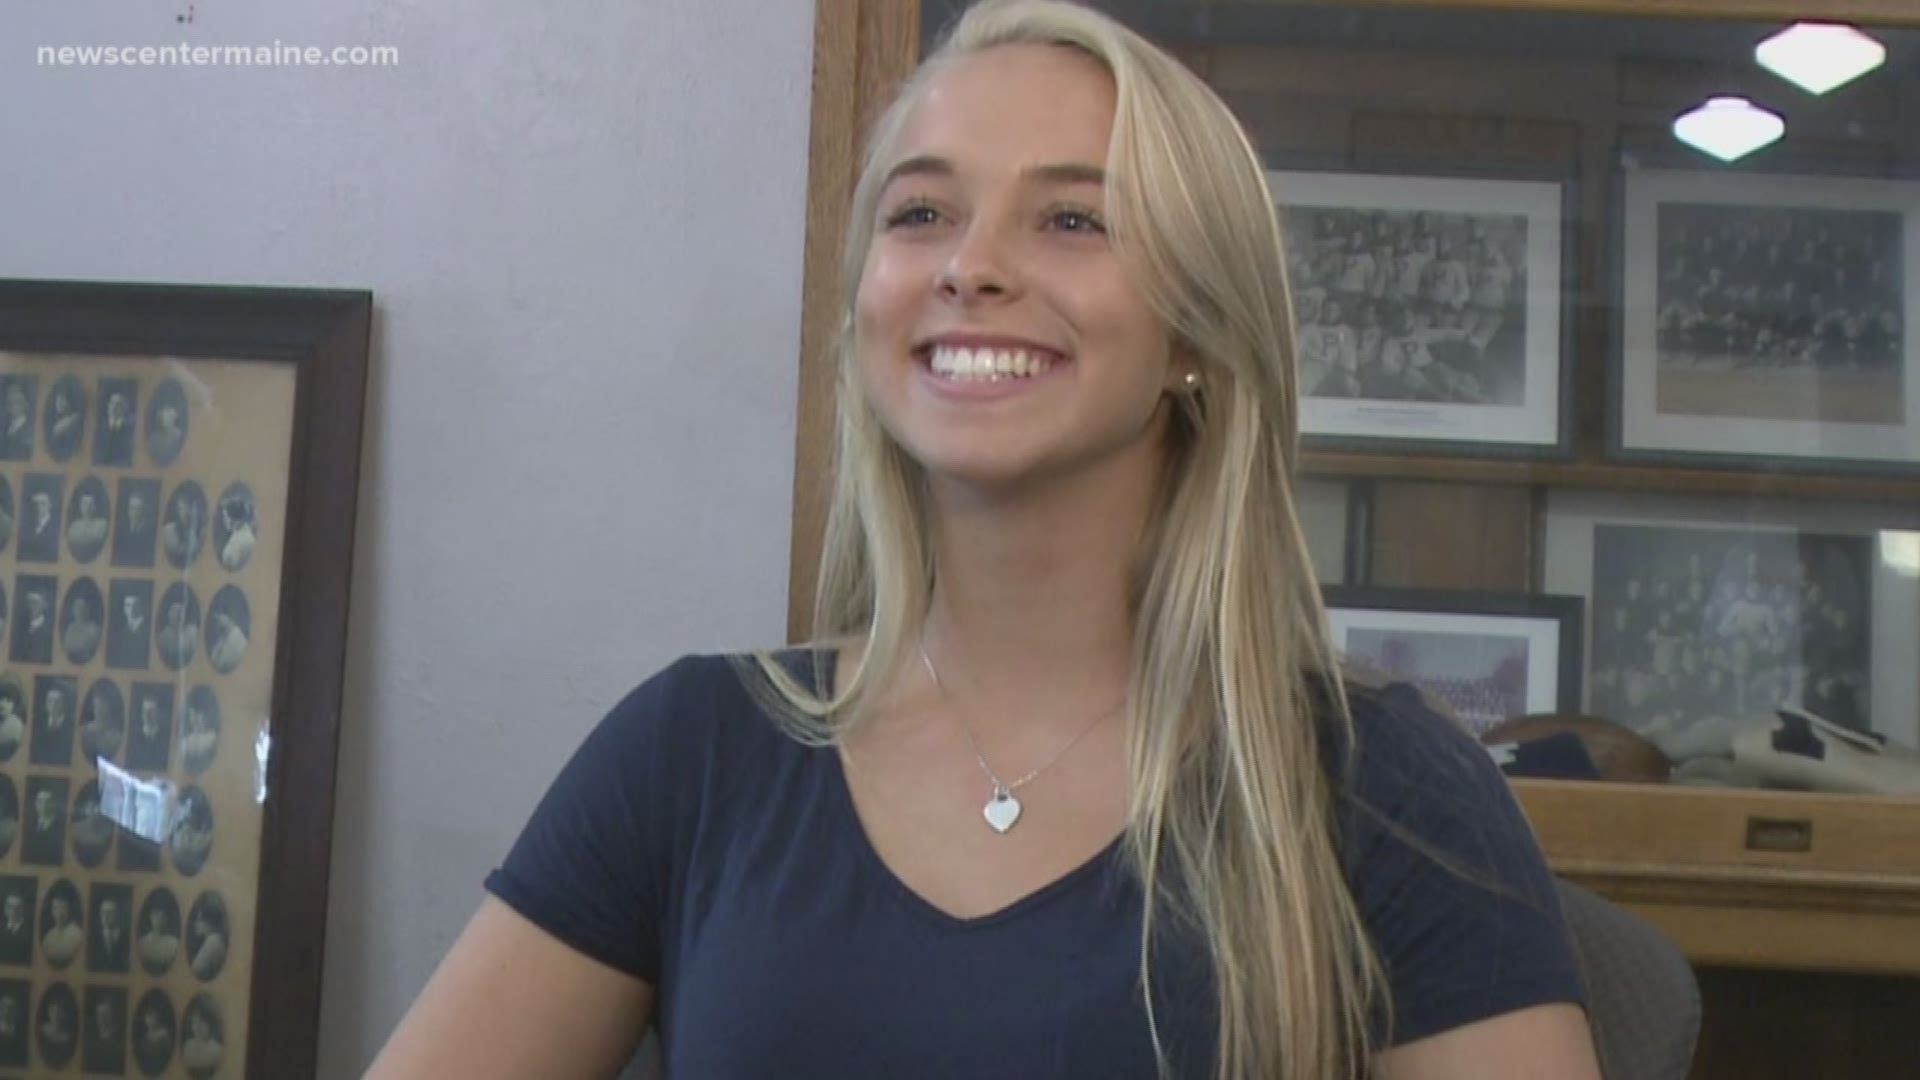 Each week we feature a senior/scholar-athlete who goes above and beyond both on the playing fields and off. Our first inductee of the new school year certainly qualifies. NEWS CENTER'S Lee Goldberg introduces us to Grace Stacey of Portland High School.